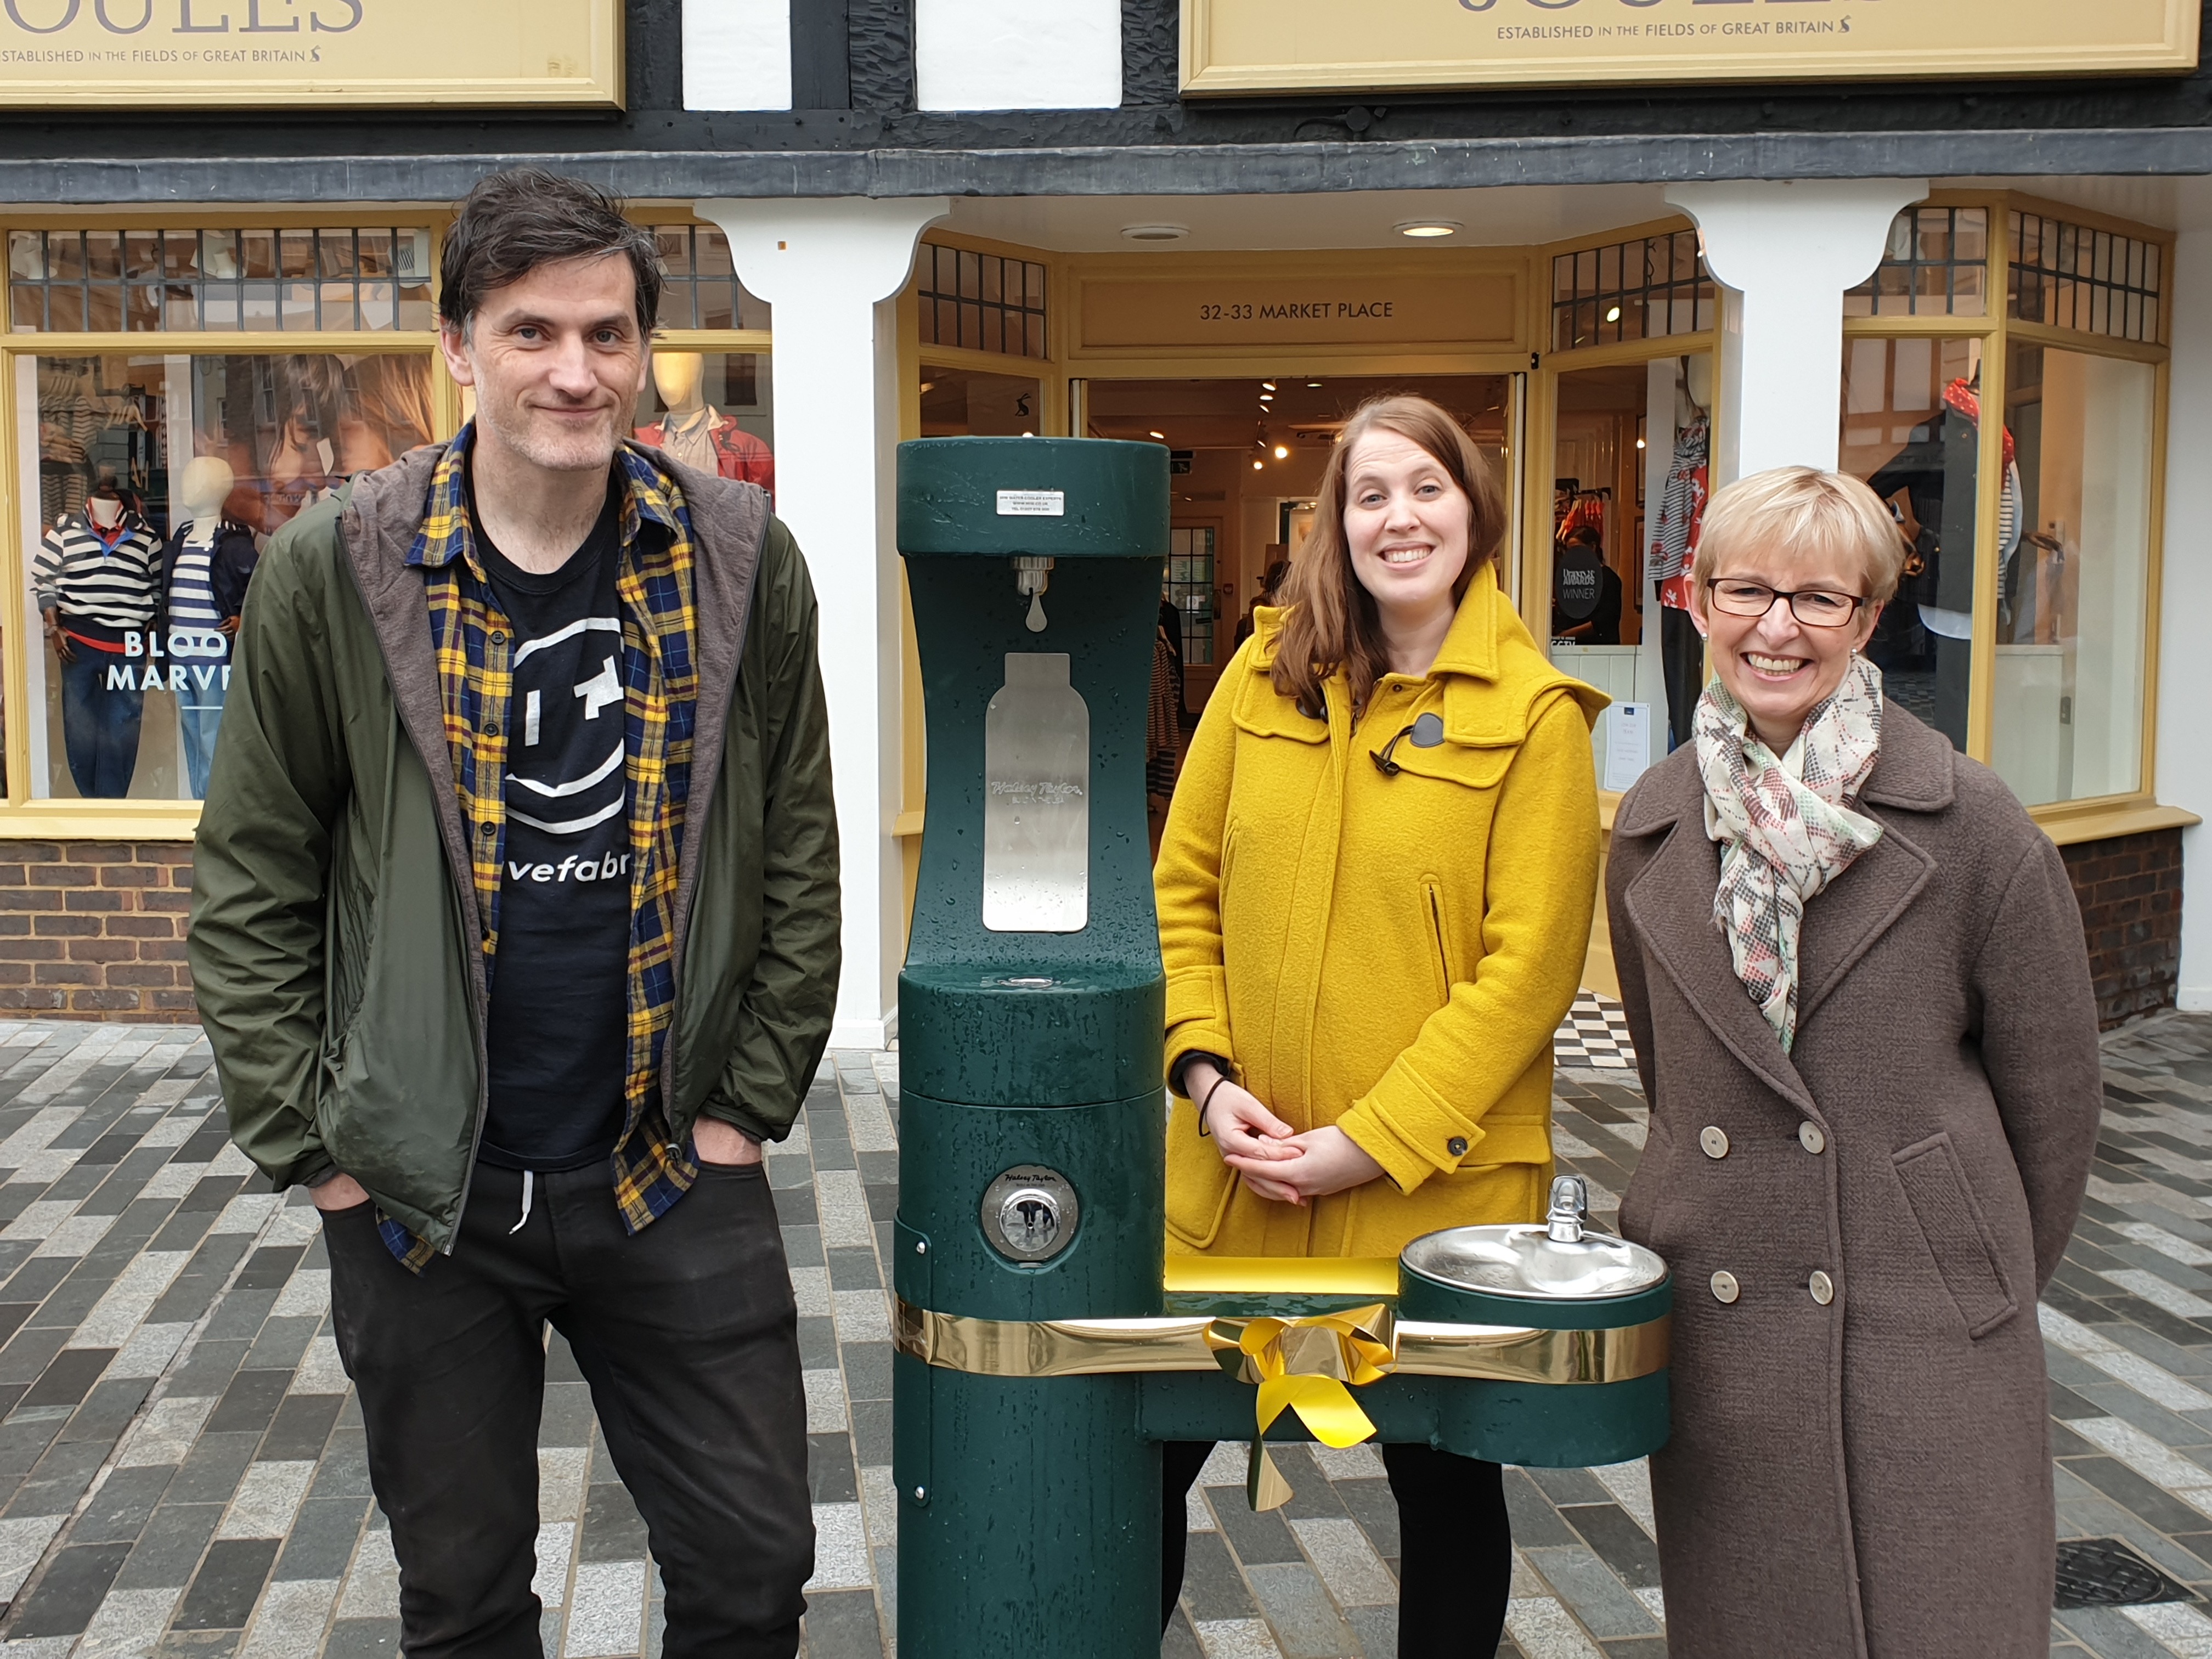 New water fountain set to help reduce plastic waste in Kingston